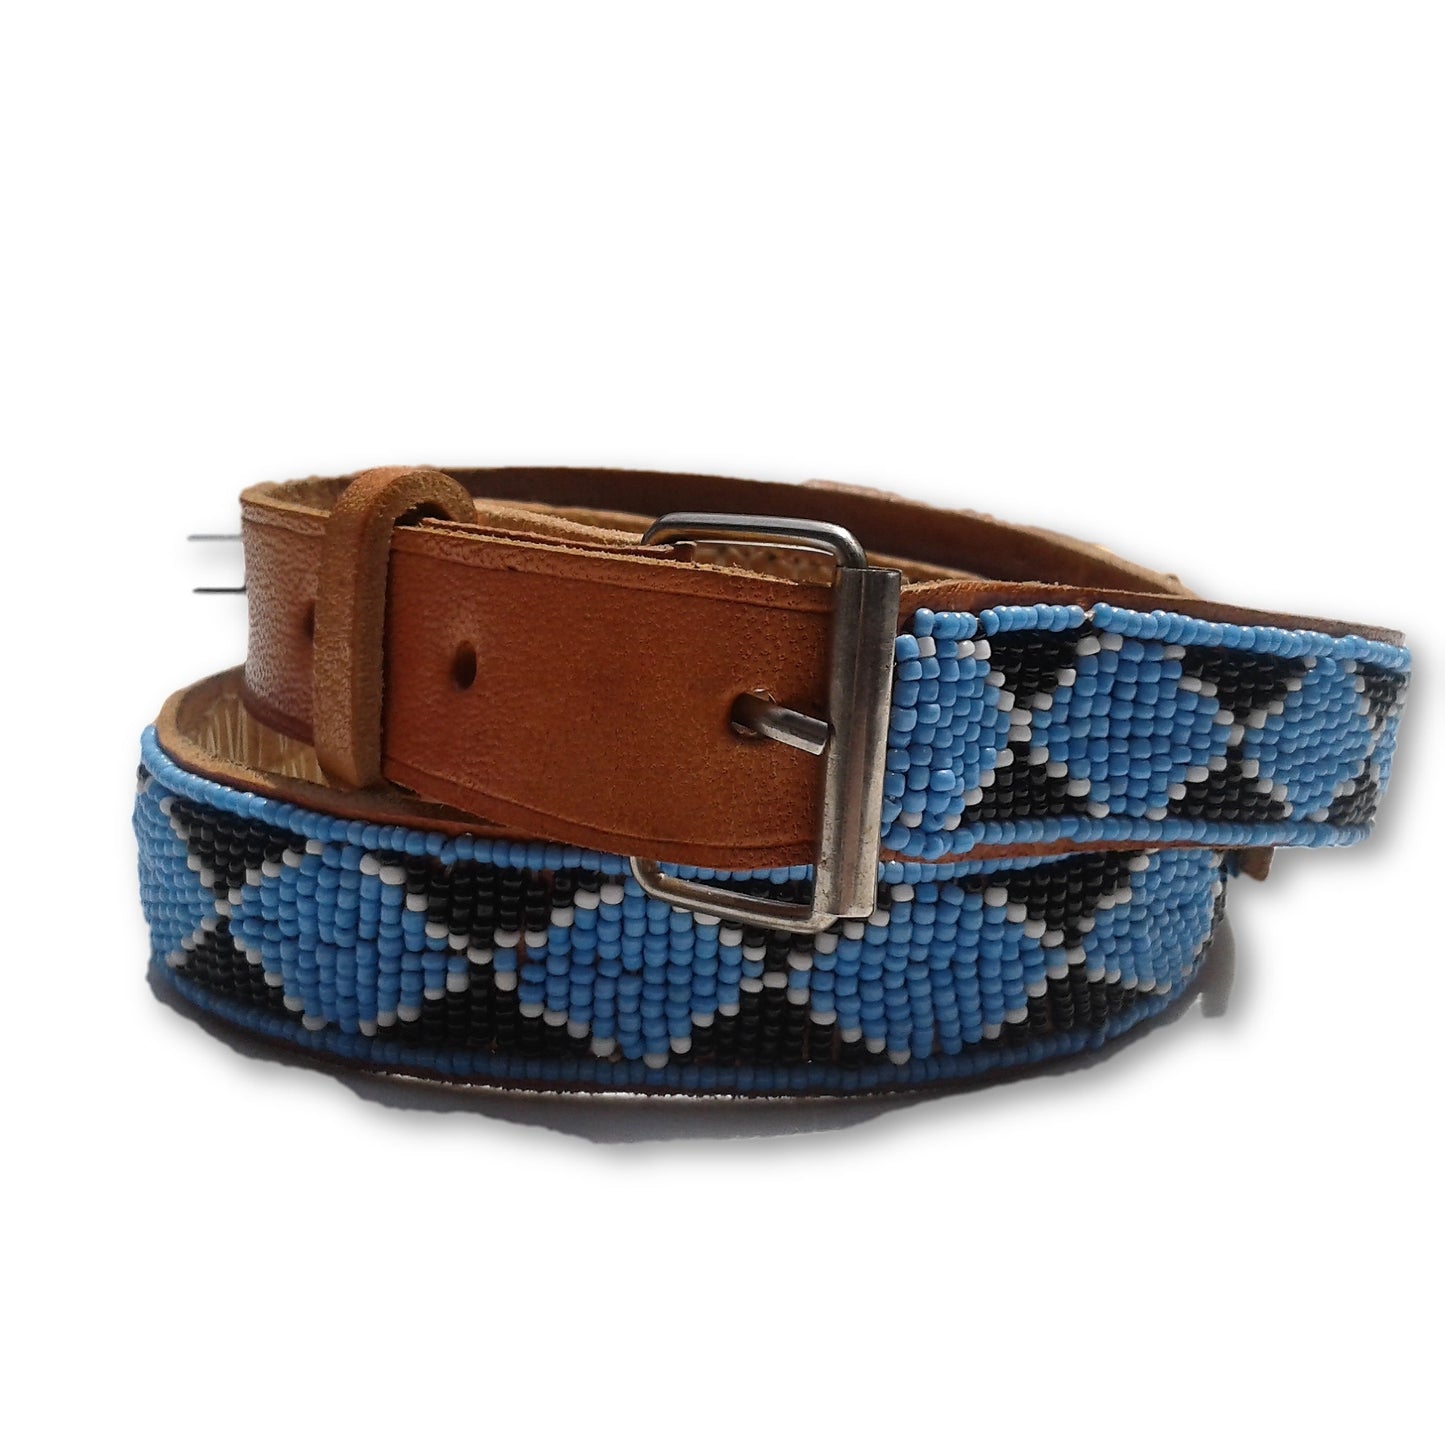 Blue belt. Material: Beads and leather